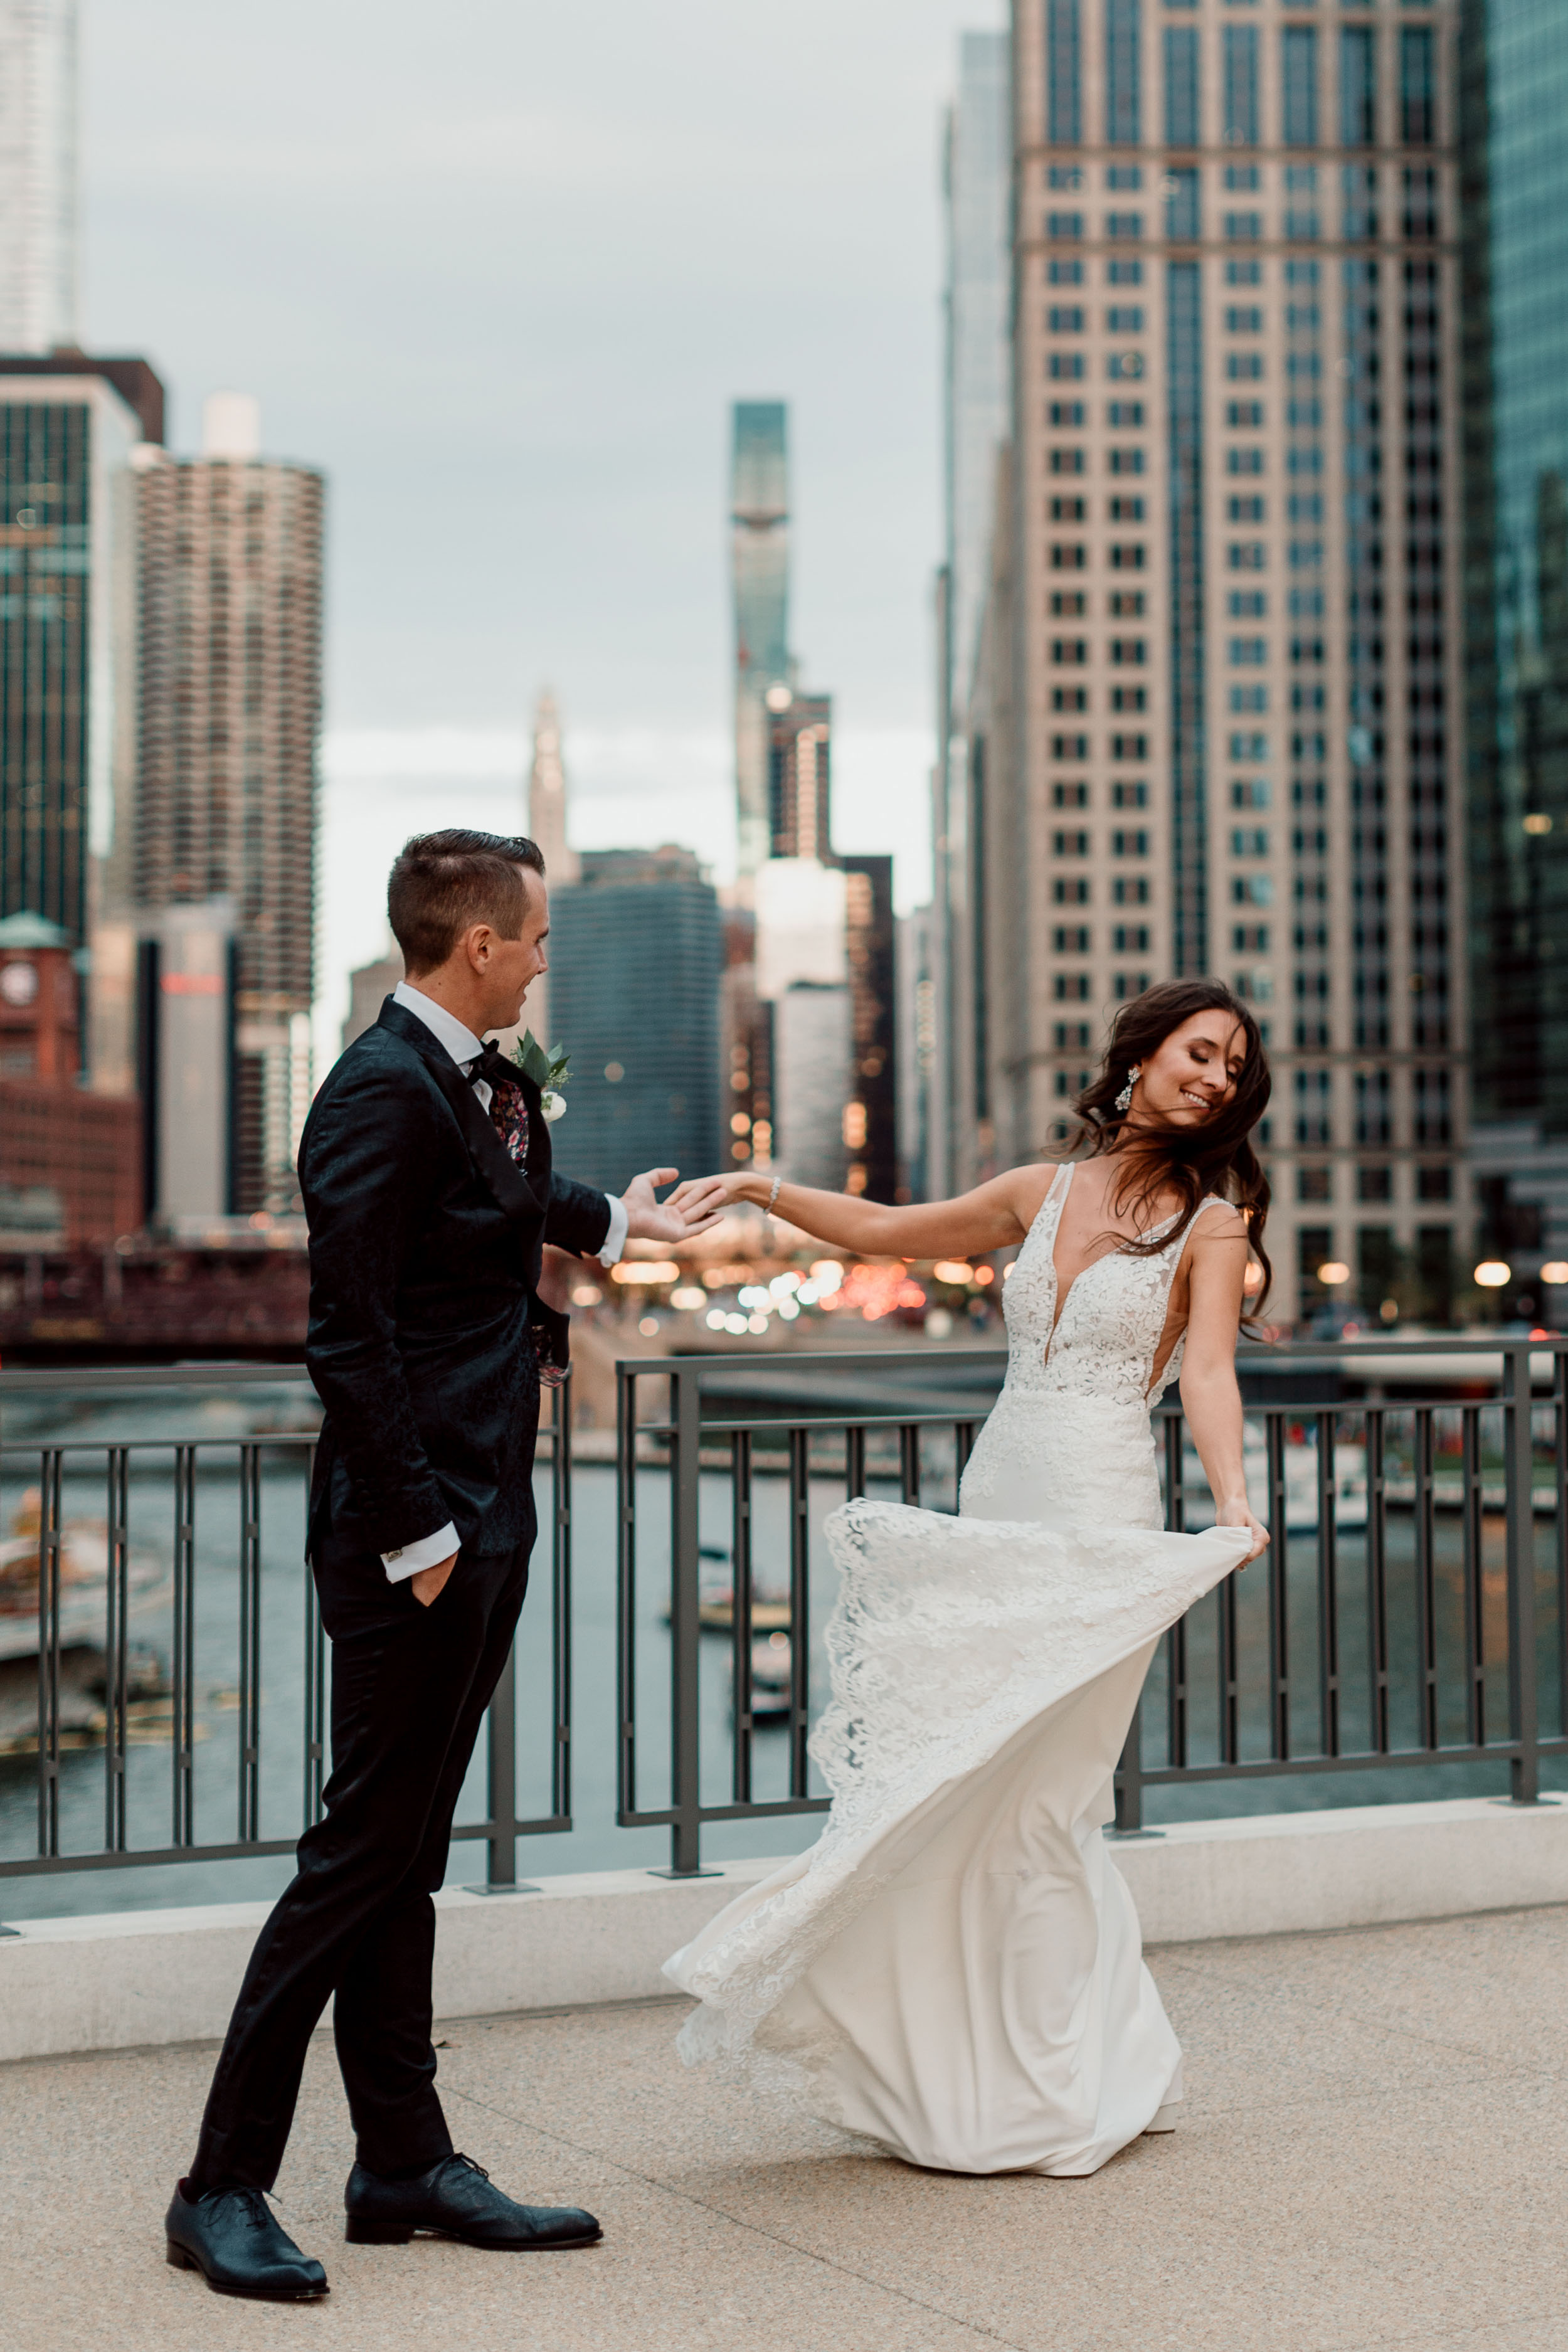 Bride and groom wedding day portraits downtown Chicago
